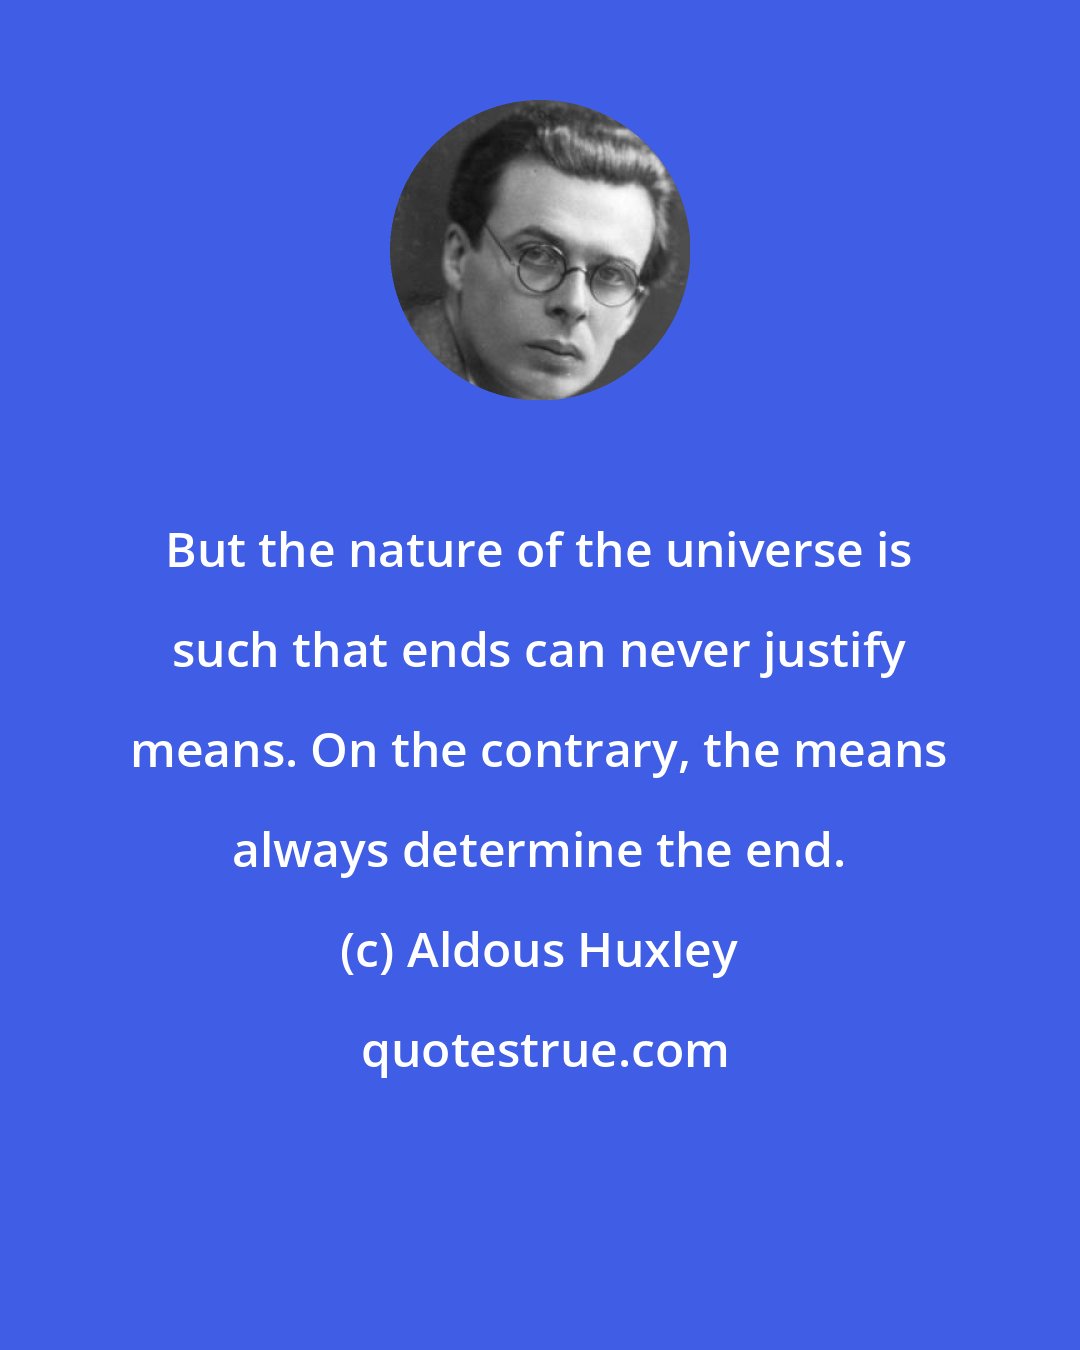 Aldous Huxley: But the nature of the universe is such that ends can never justify means. On the contrary, the means always determine the end.